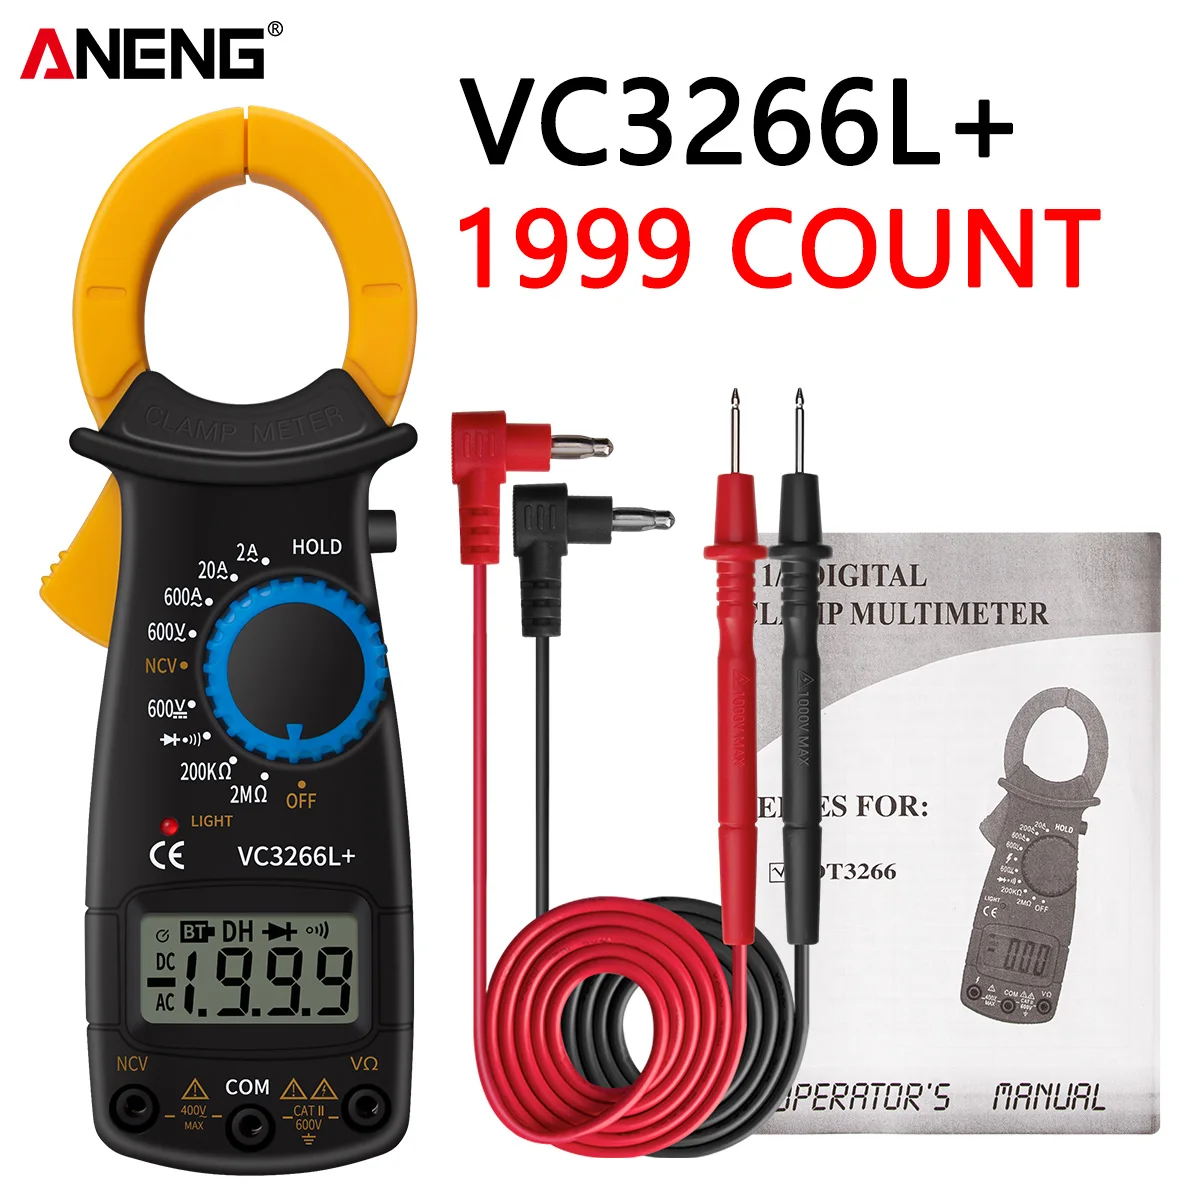 

1999 Clamp Professional Electrical True Digital Multimeter Counts Tester Meter Voltage Current Phm Temp